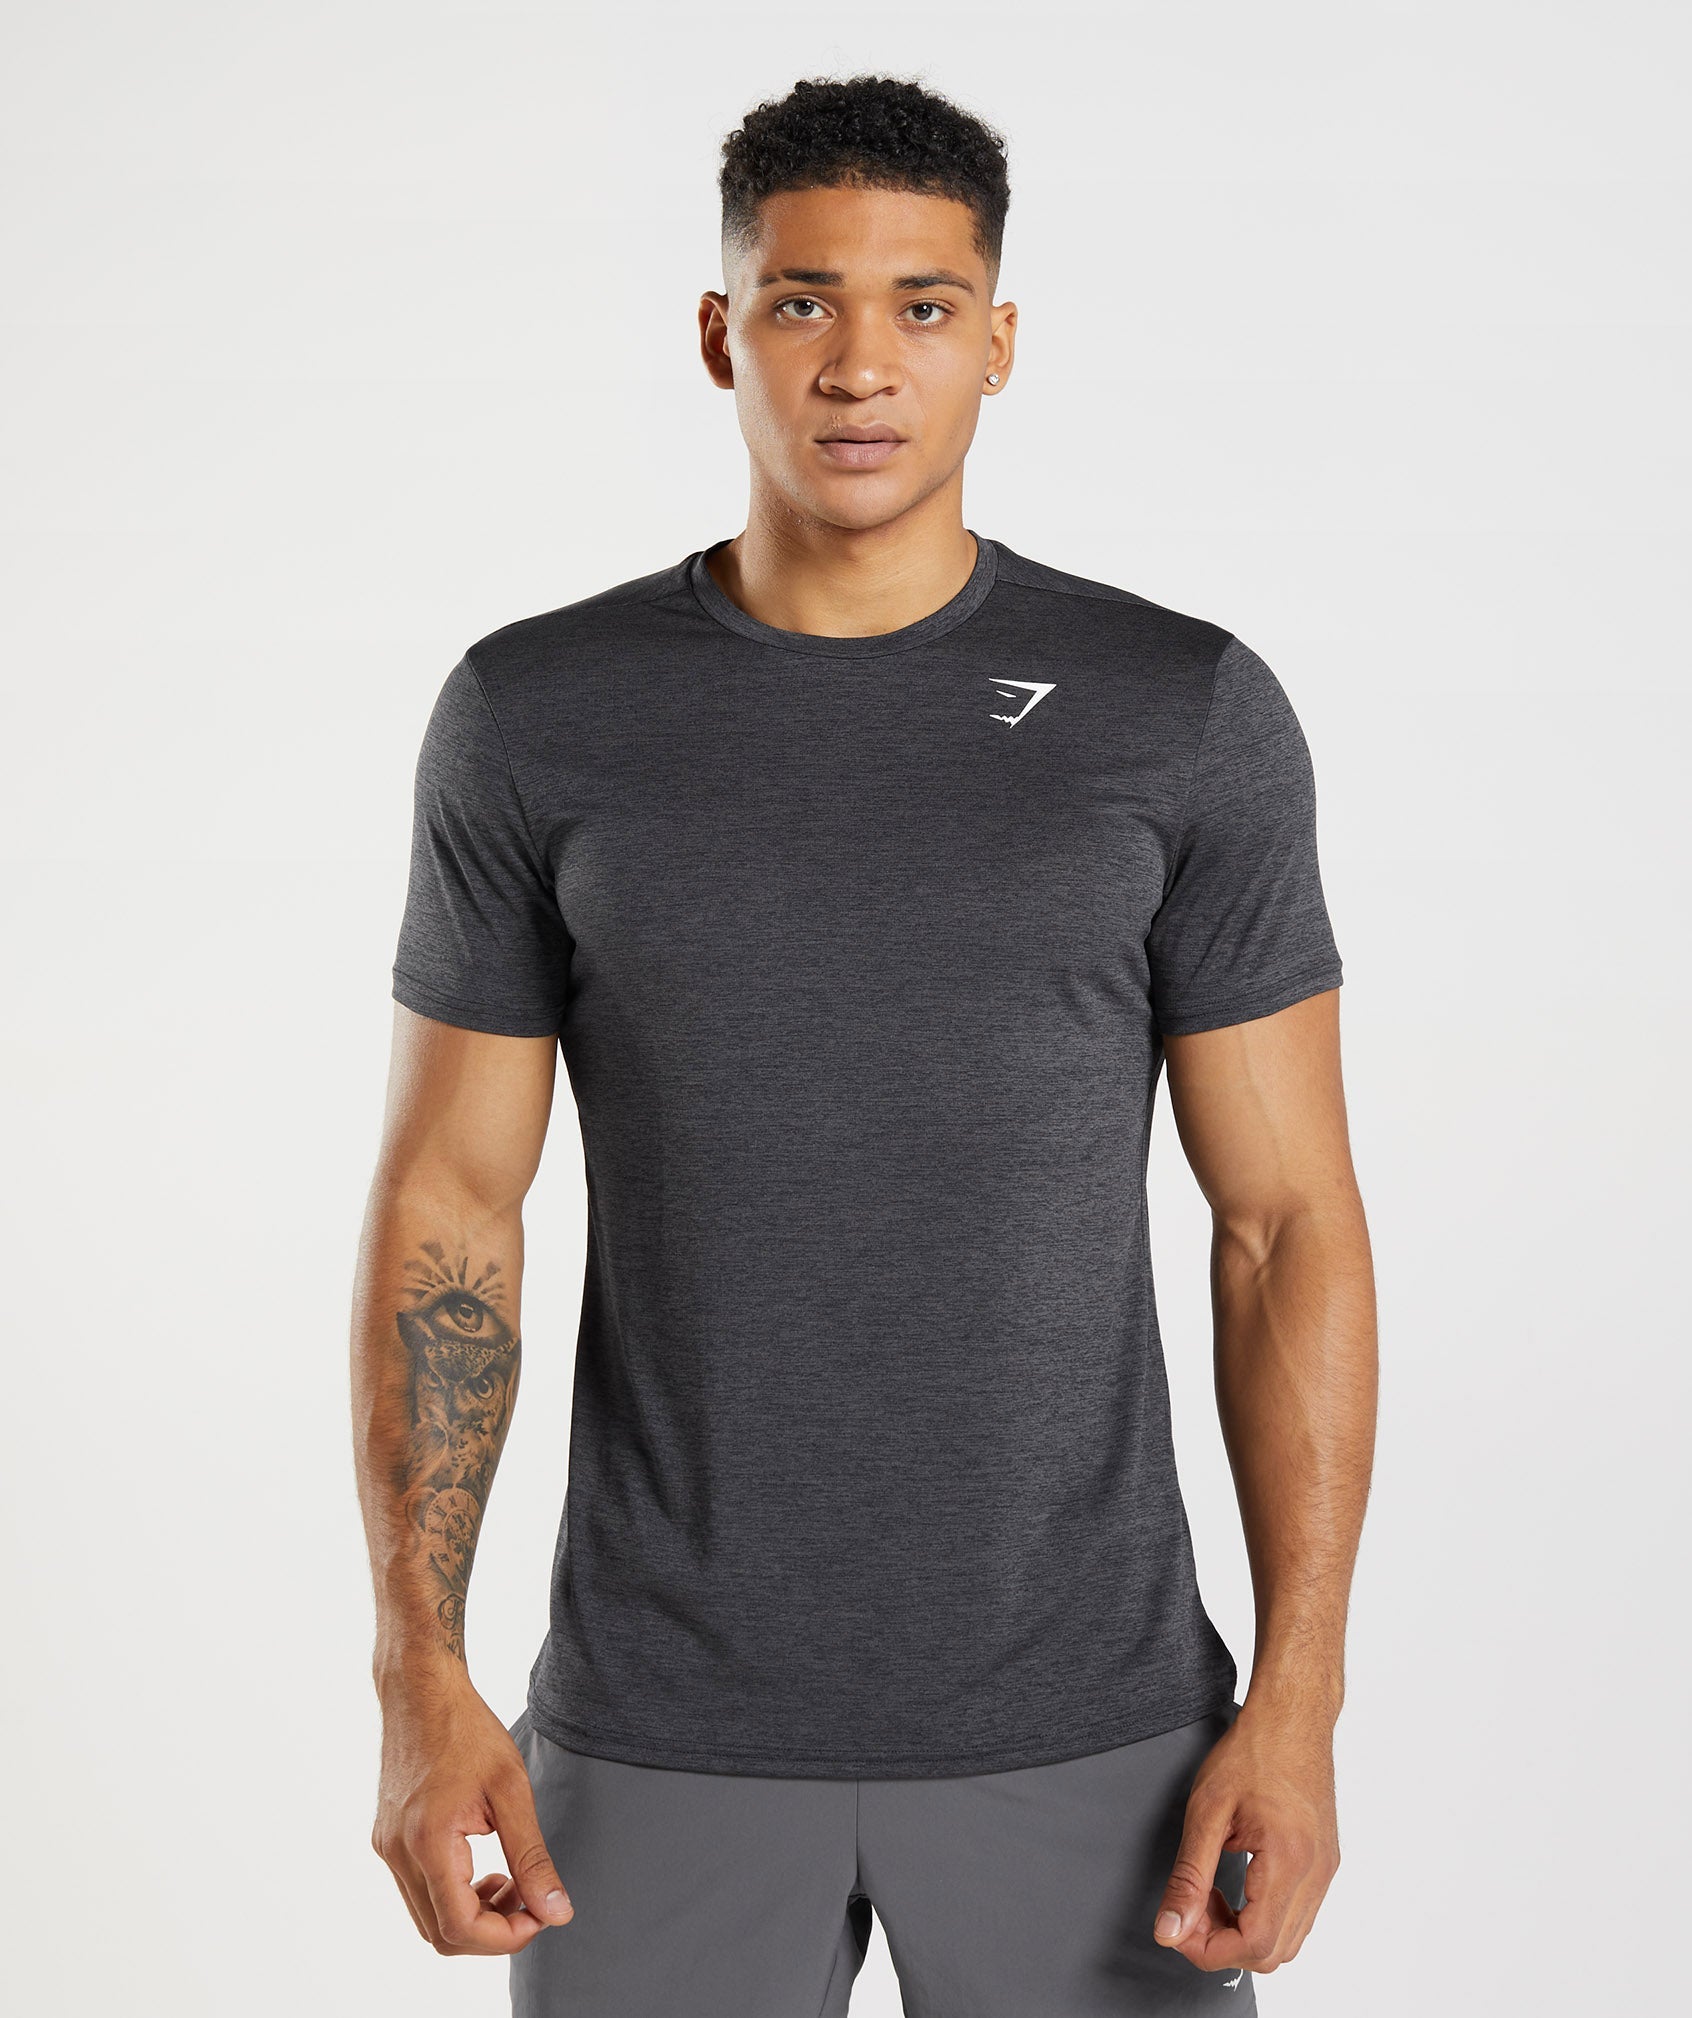 Gymshark on X: Fulfil your calling. The Onyx has returned. Available on    / X